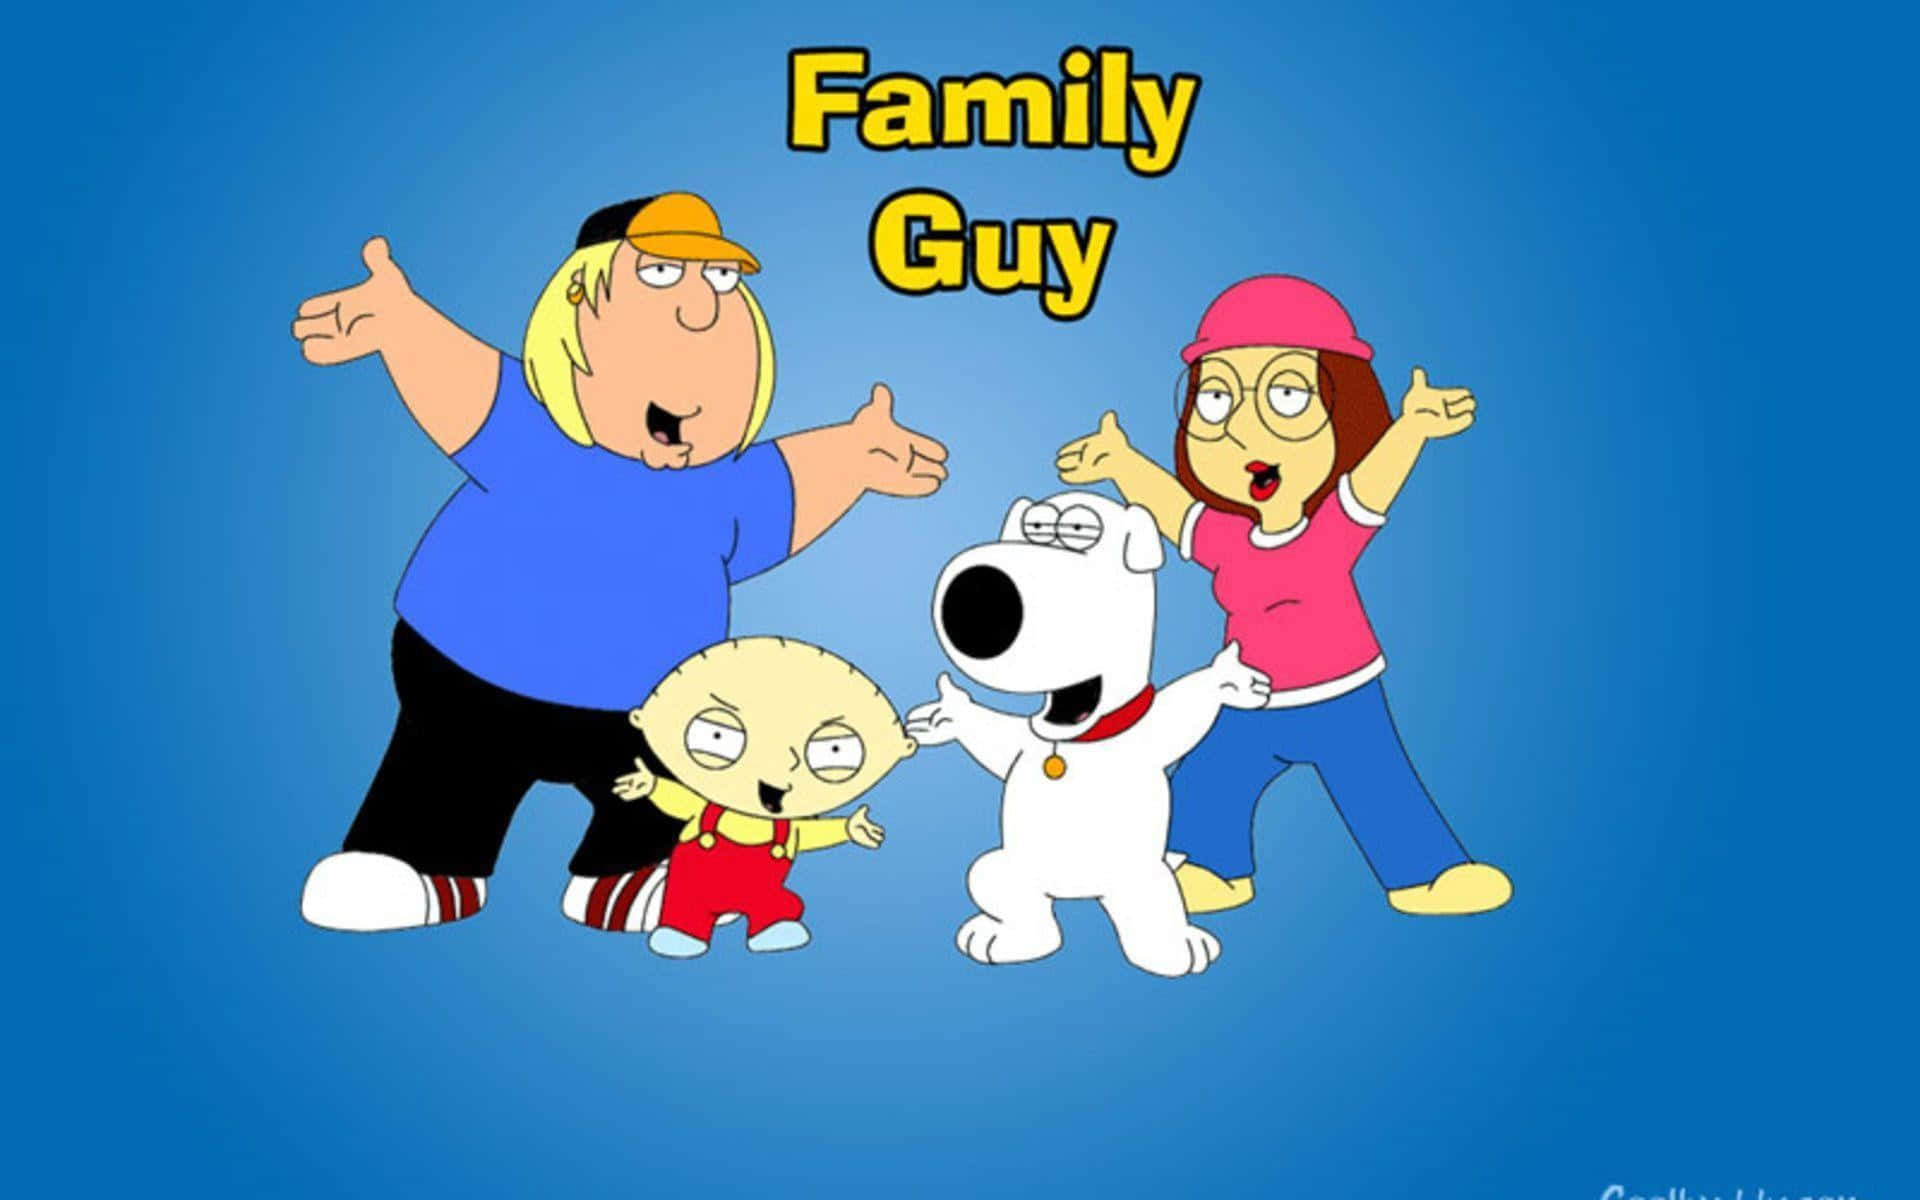 Come Join in the Fun on Family Guy